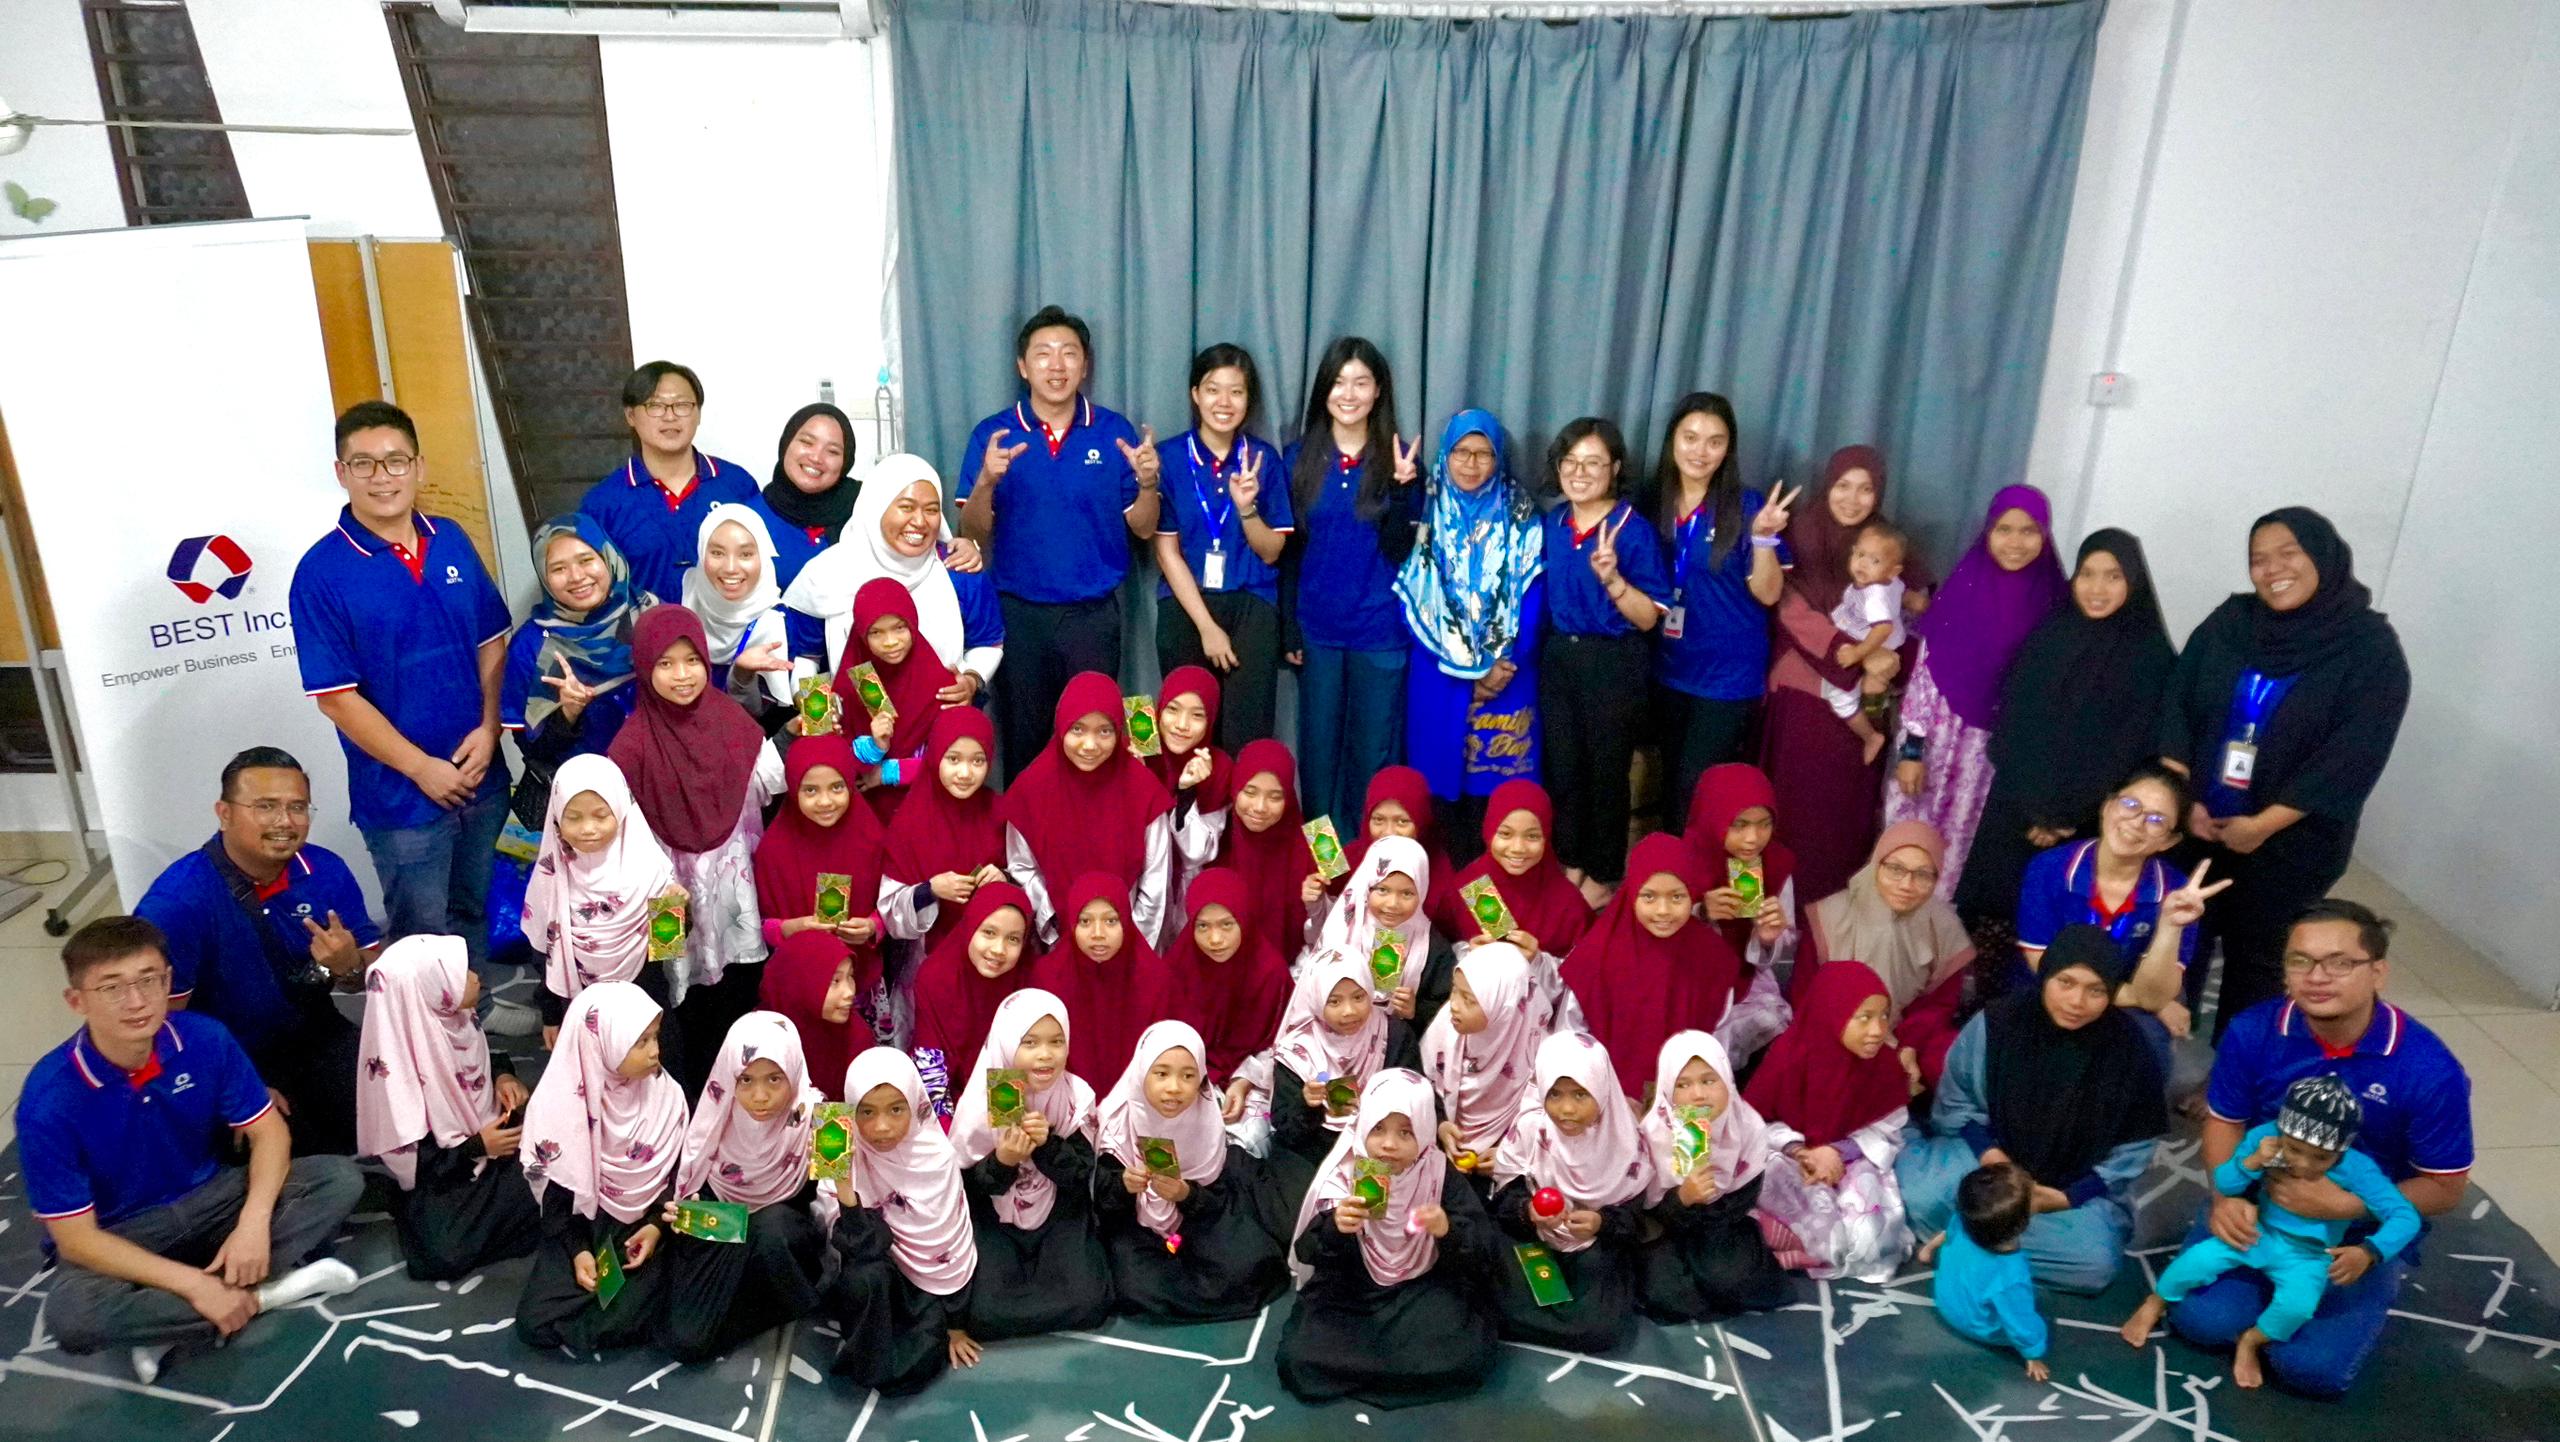 The buka puasa session served not only as sources of entertainment but also as avenues for fostering stronger bonds between the members of BEST Inc Malaysia and the children.